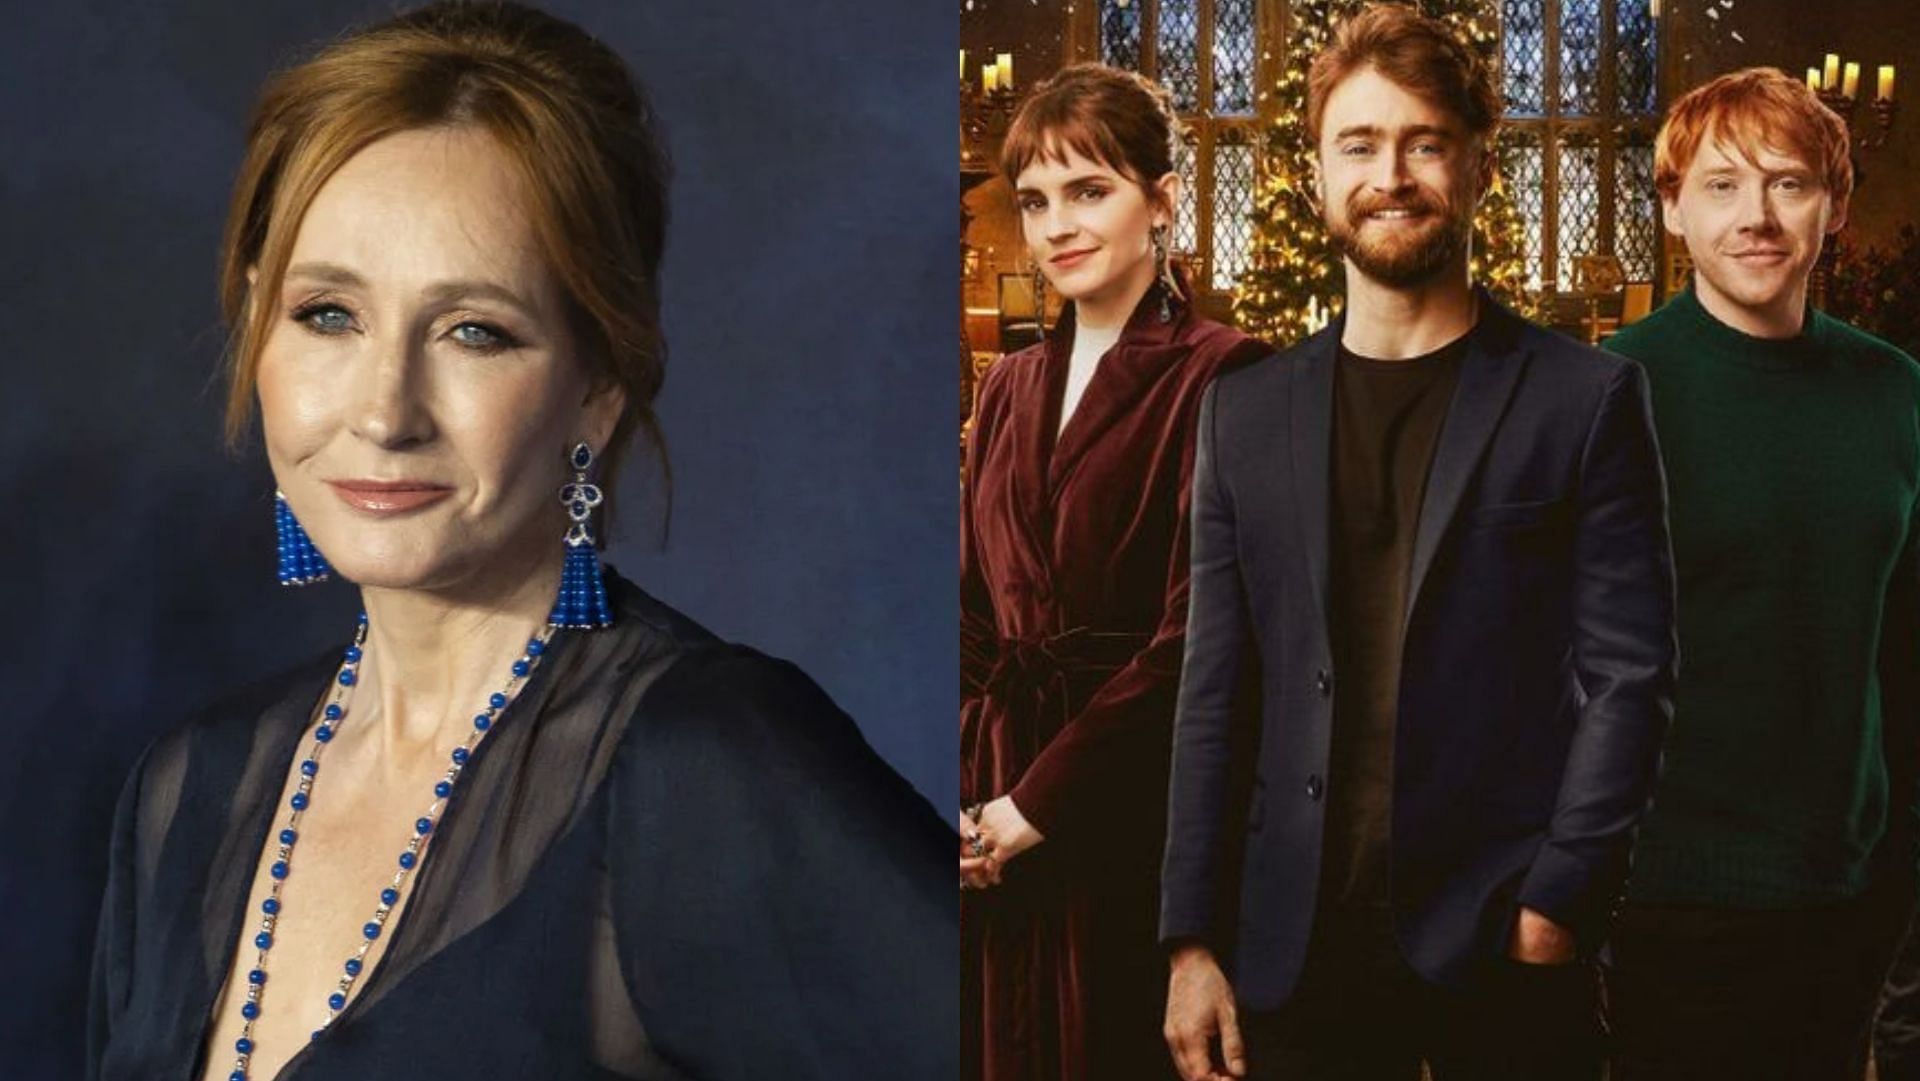 JK Rowling chose not to join the Harry Potter reunion special. (Image via Gary Mitchell/Getty Images, @TheAllanAguirre/Twitter)